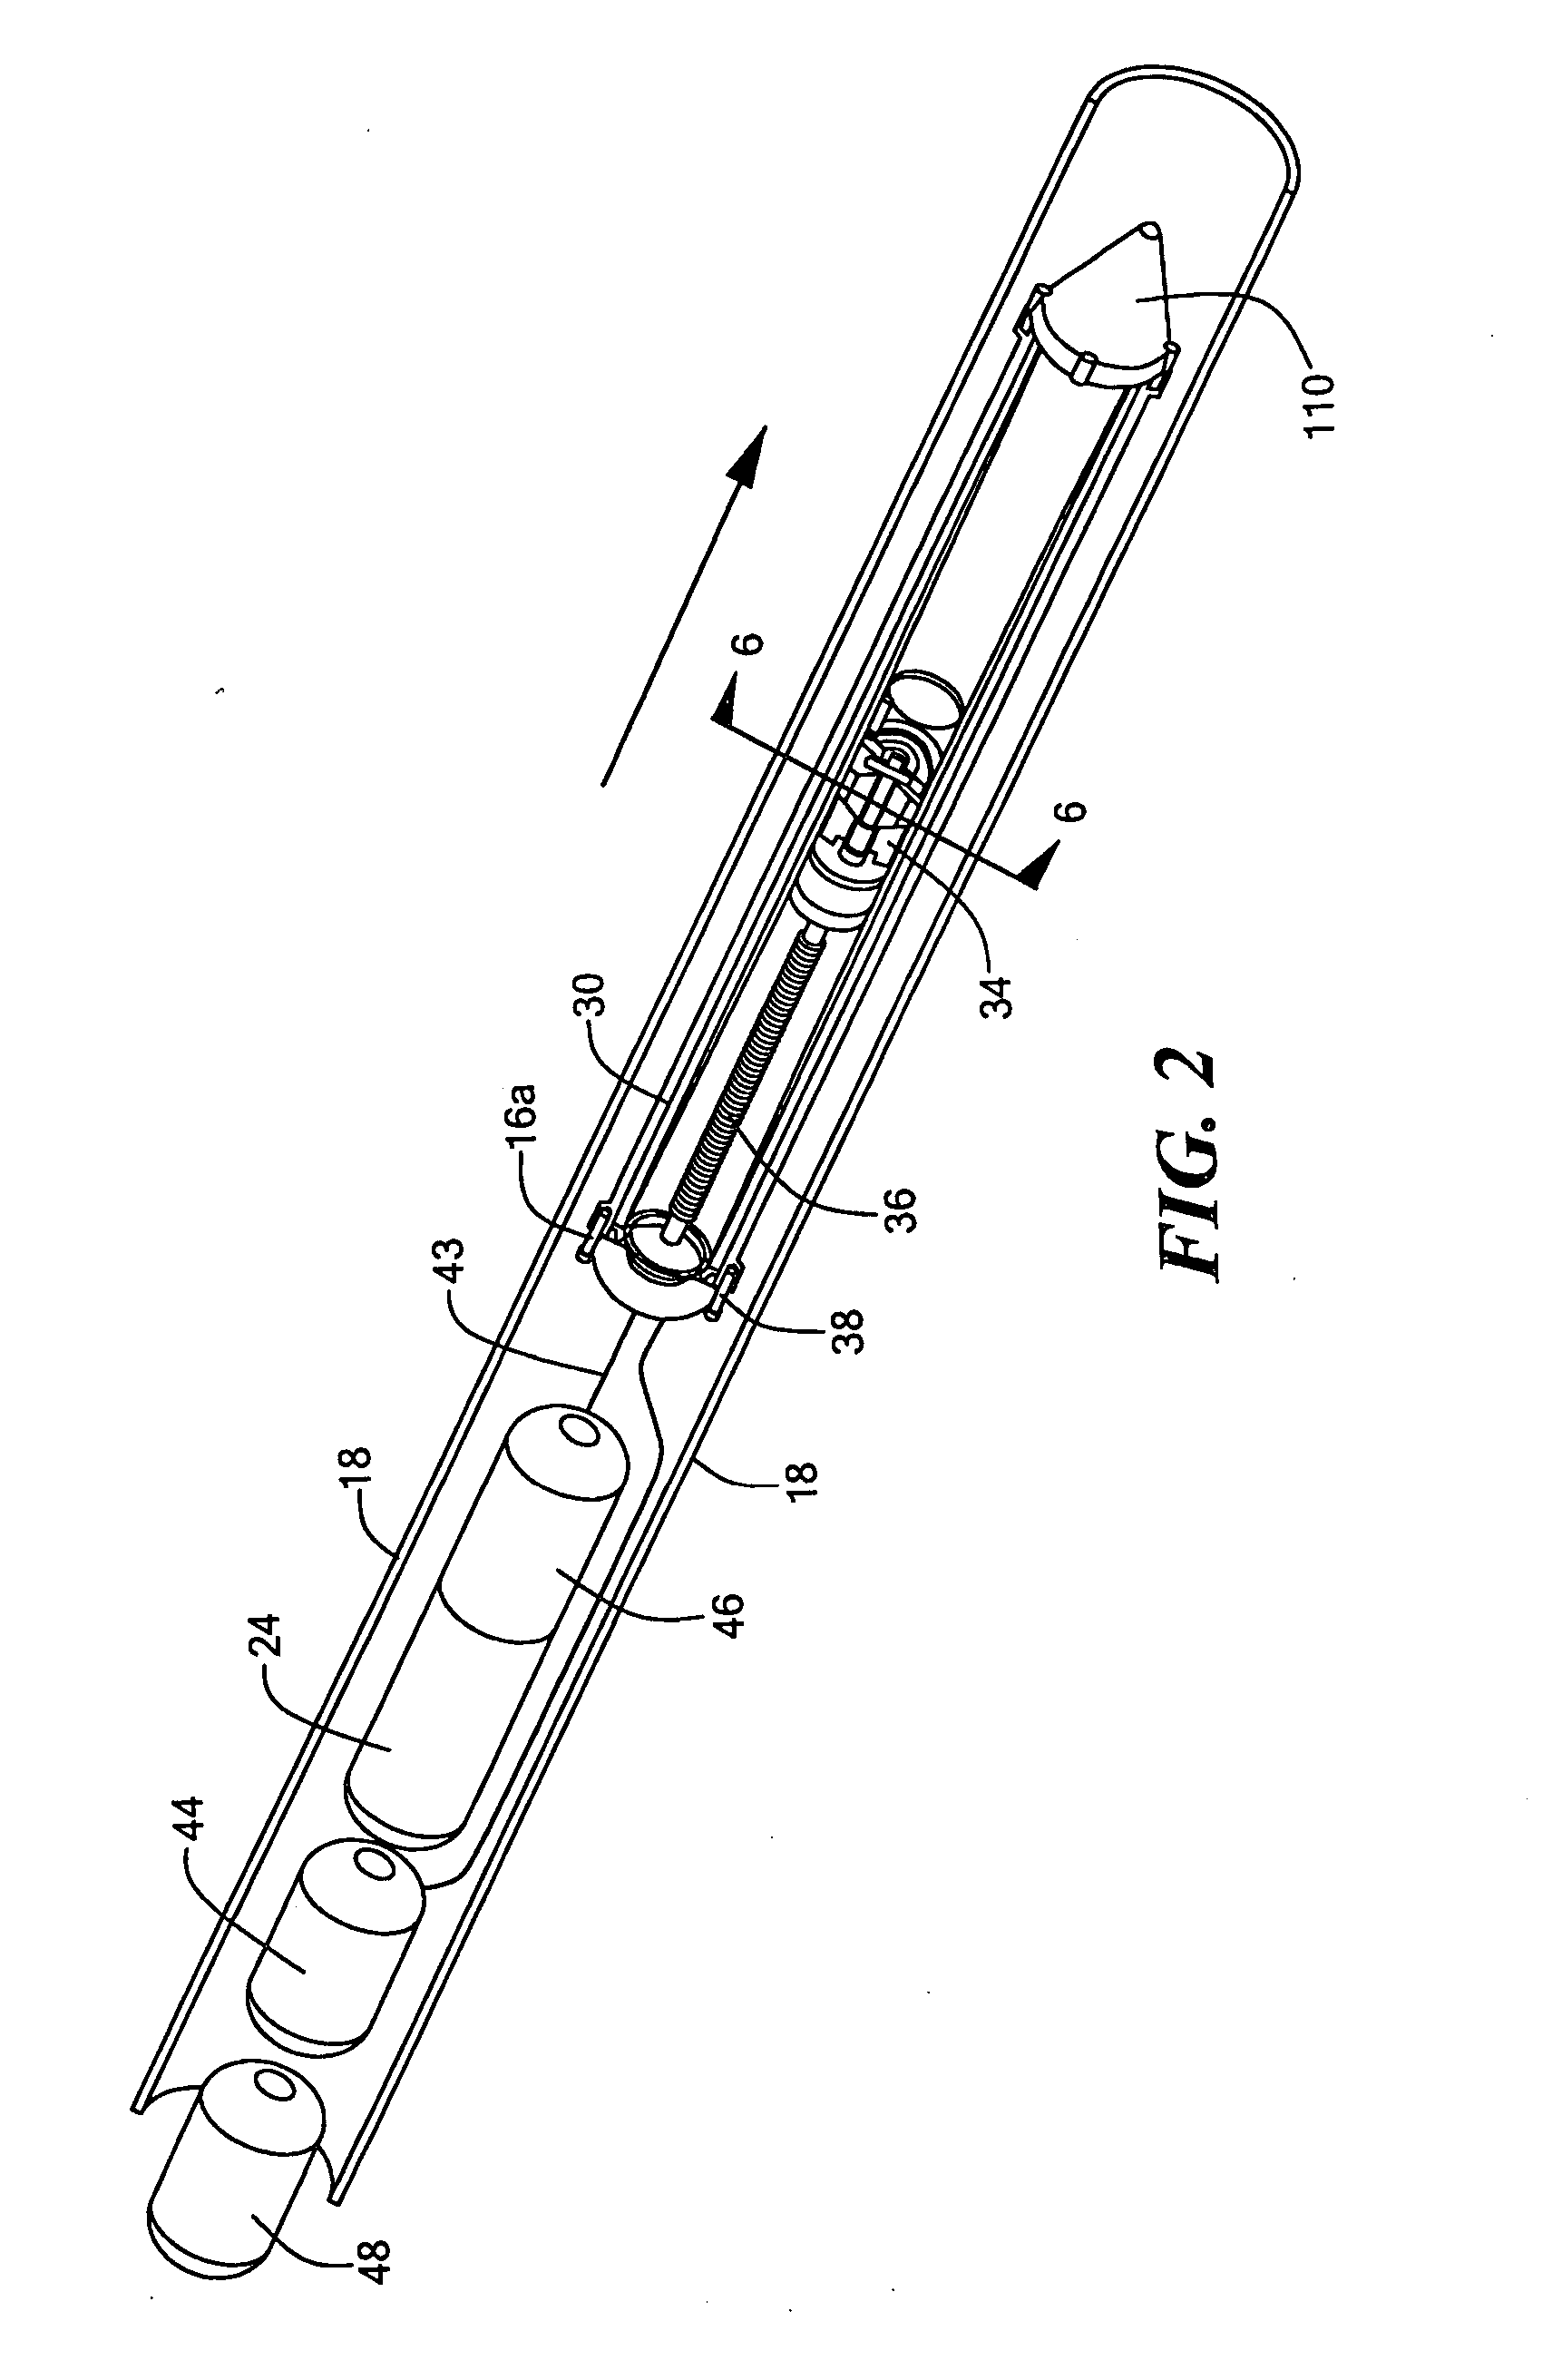 Compact navigation system and method